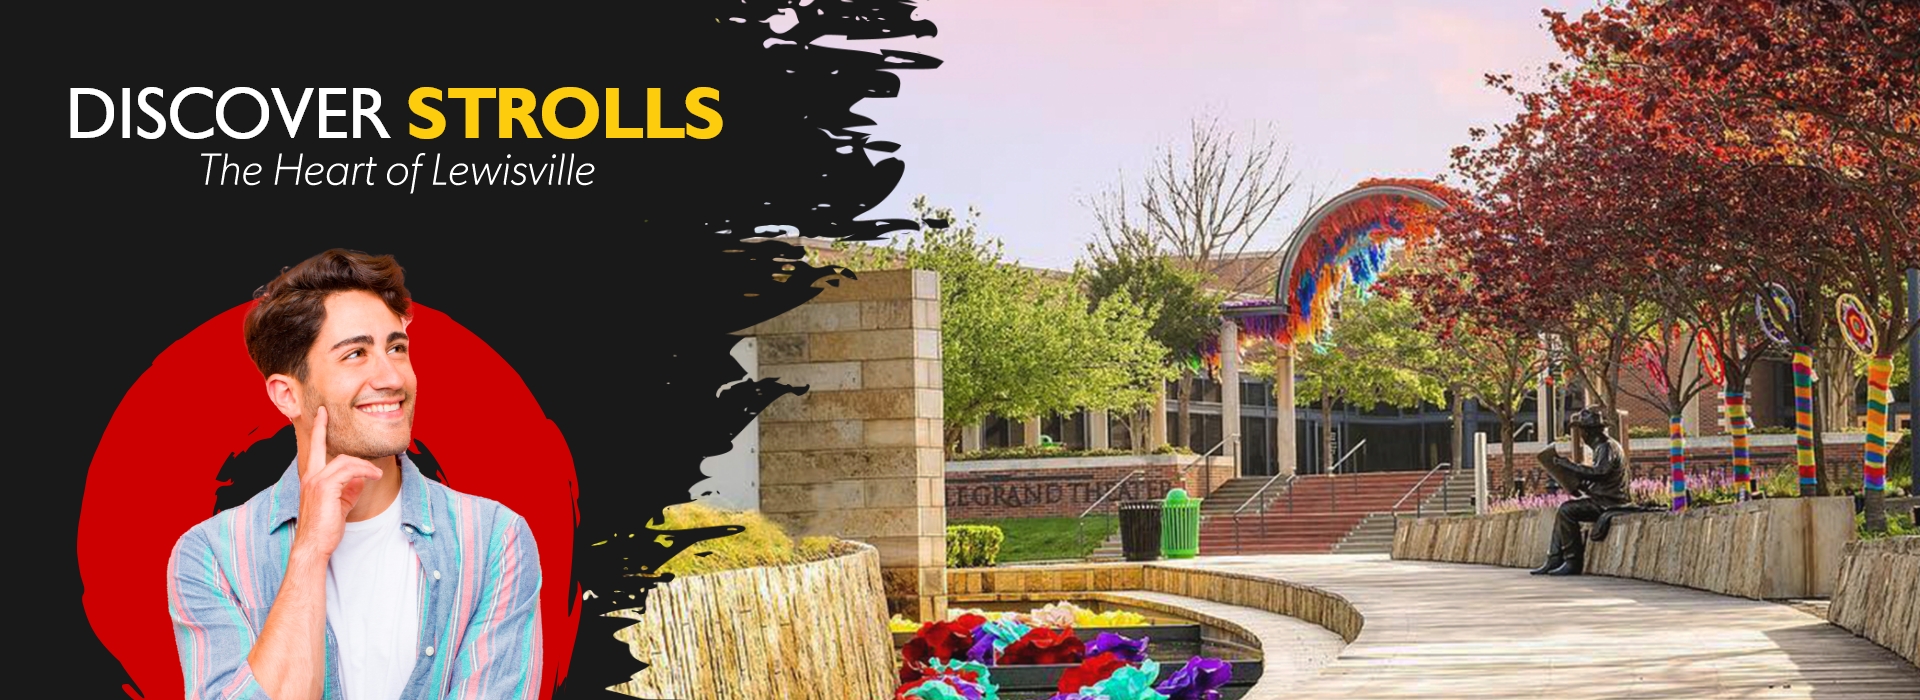 Discover Strolls - The Heart of Lewisville